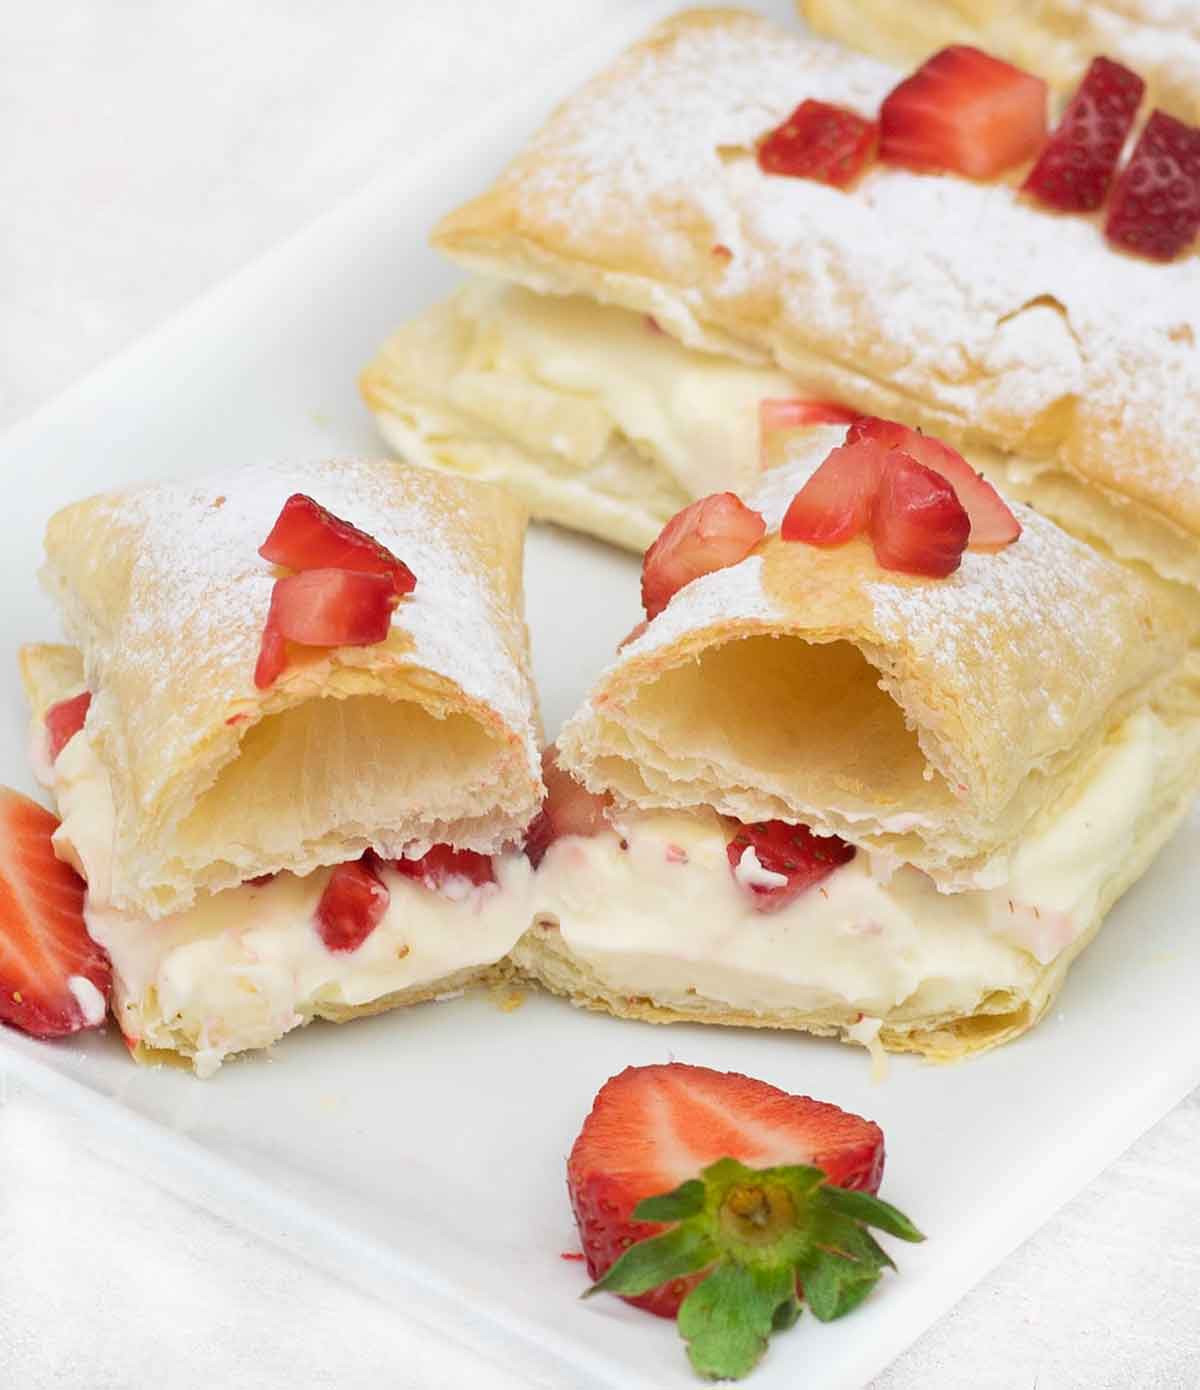 Cut the Strawberry Mille Feuille.